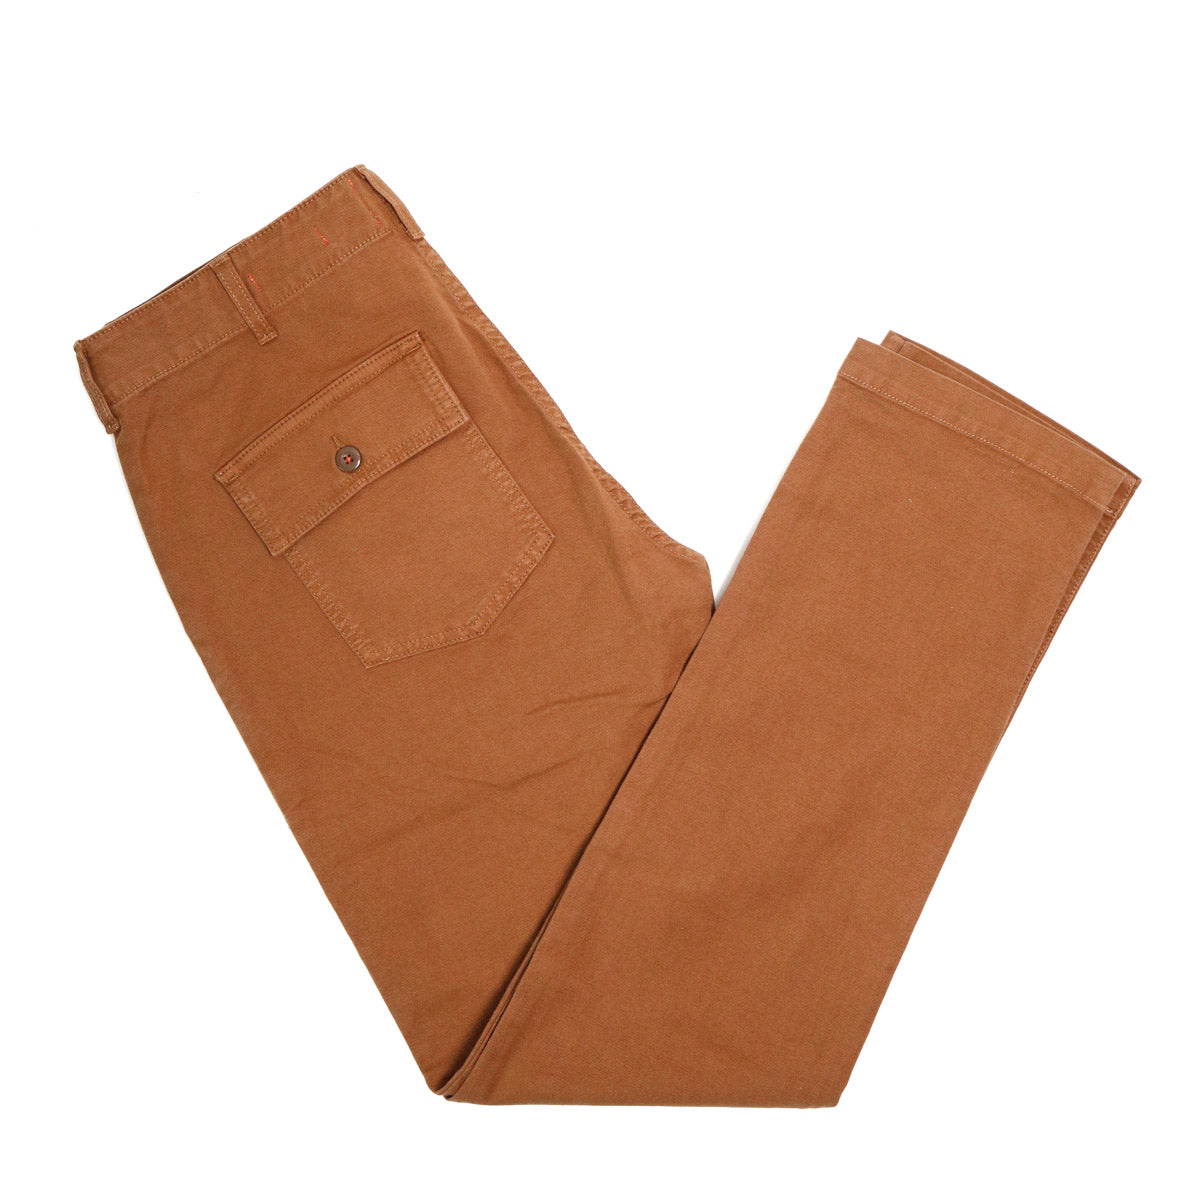 The Fatigue Pant Stretch Oxford Whiskey